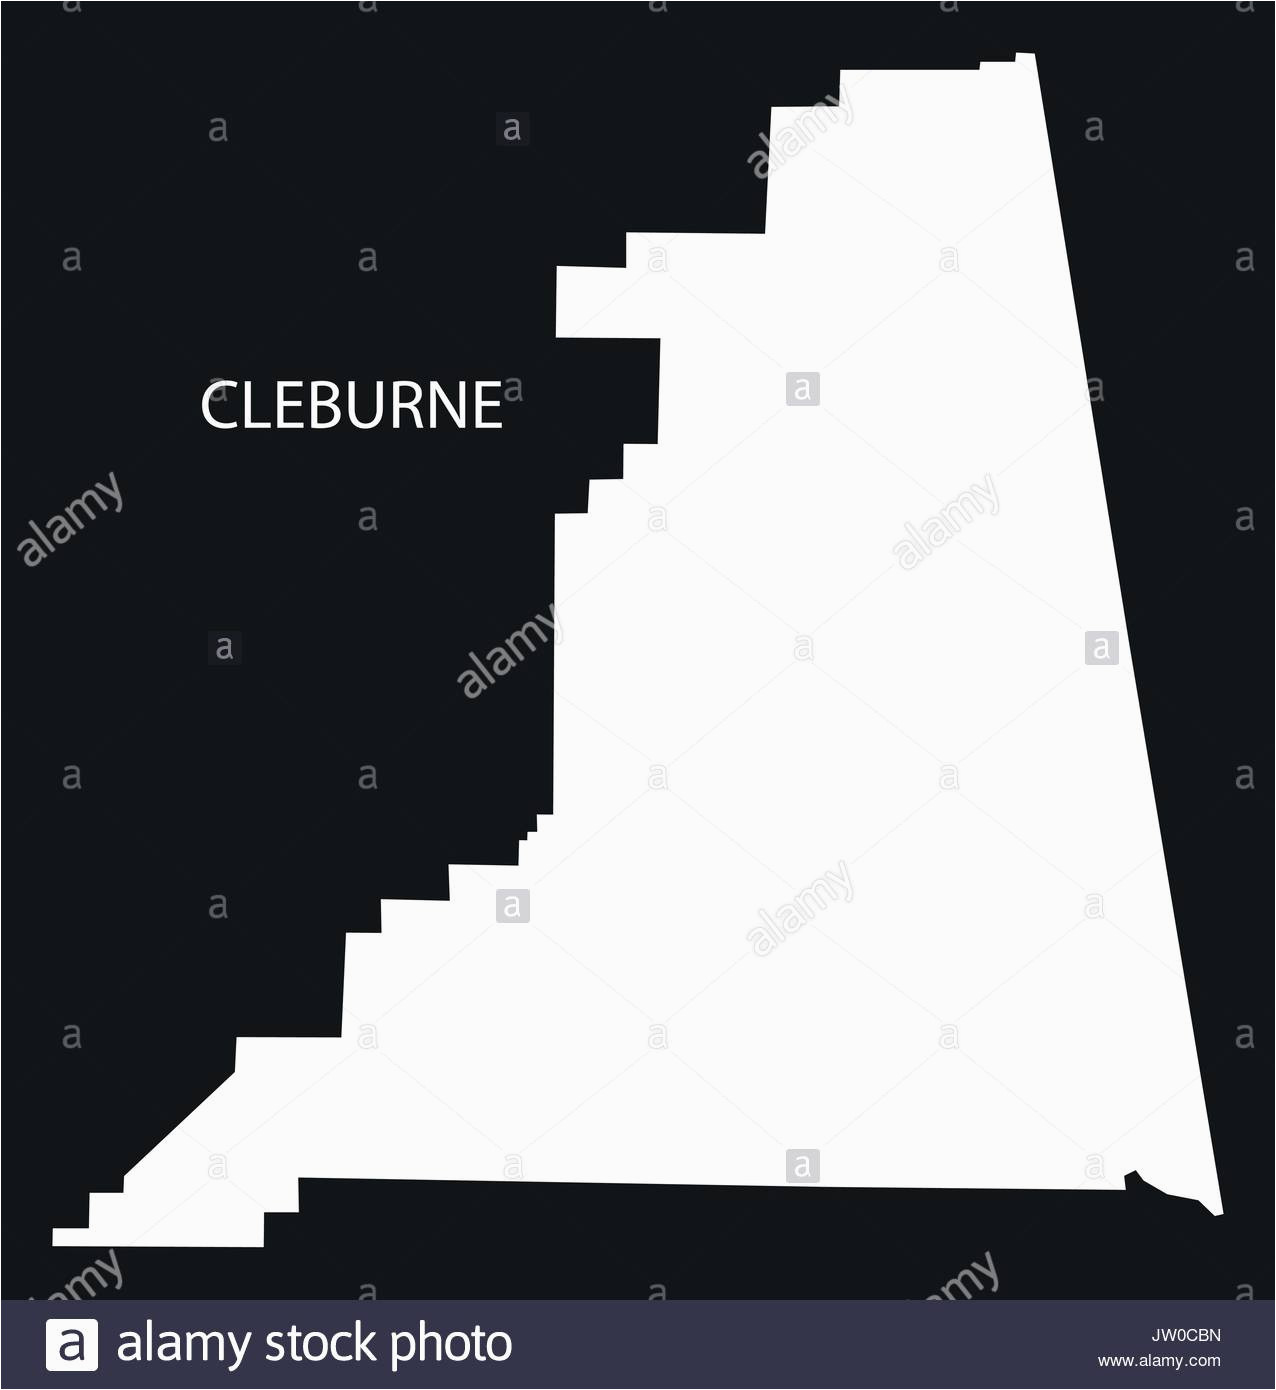 cleburne stock photos cleburne stock images alamy